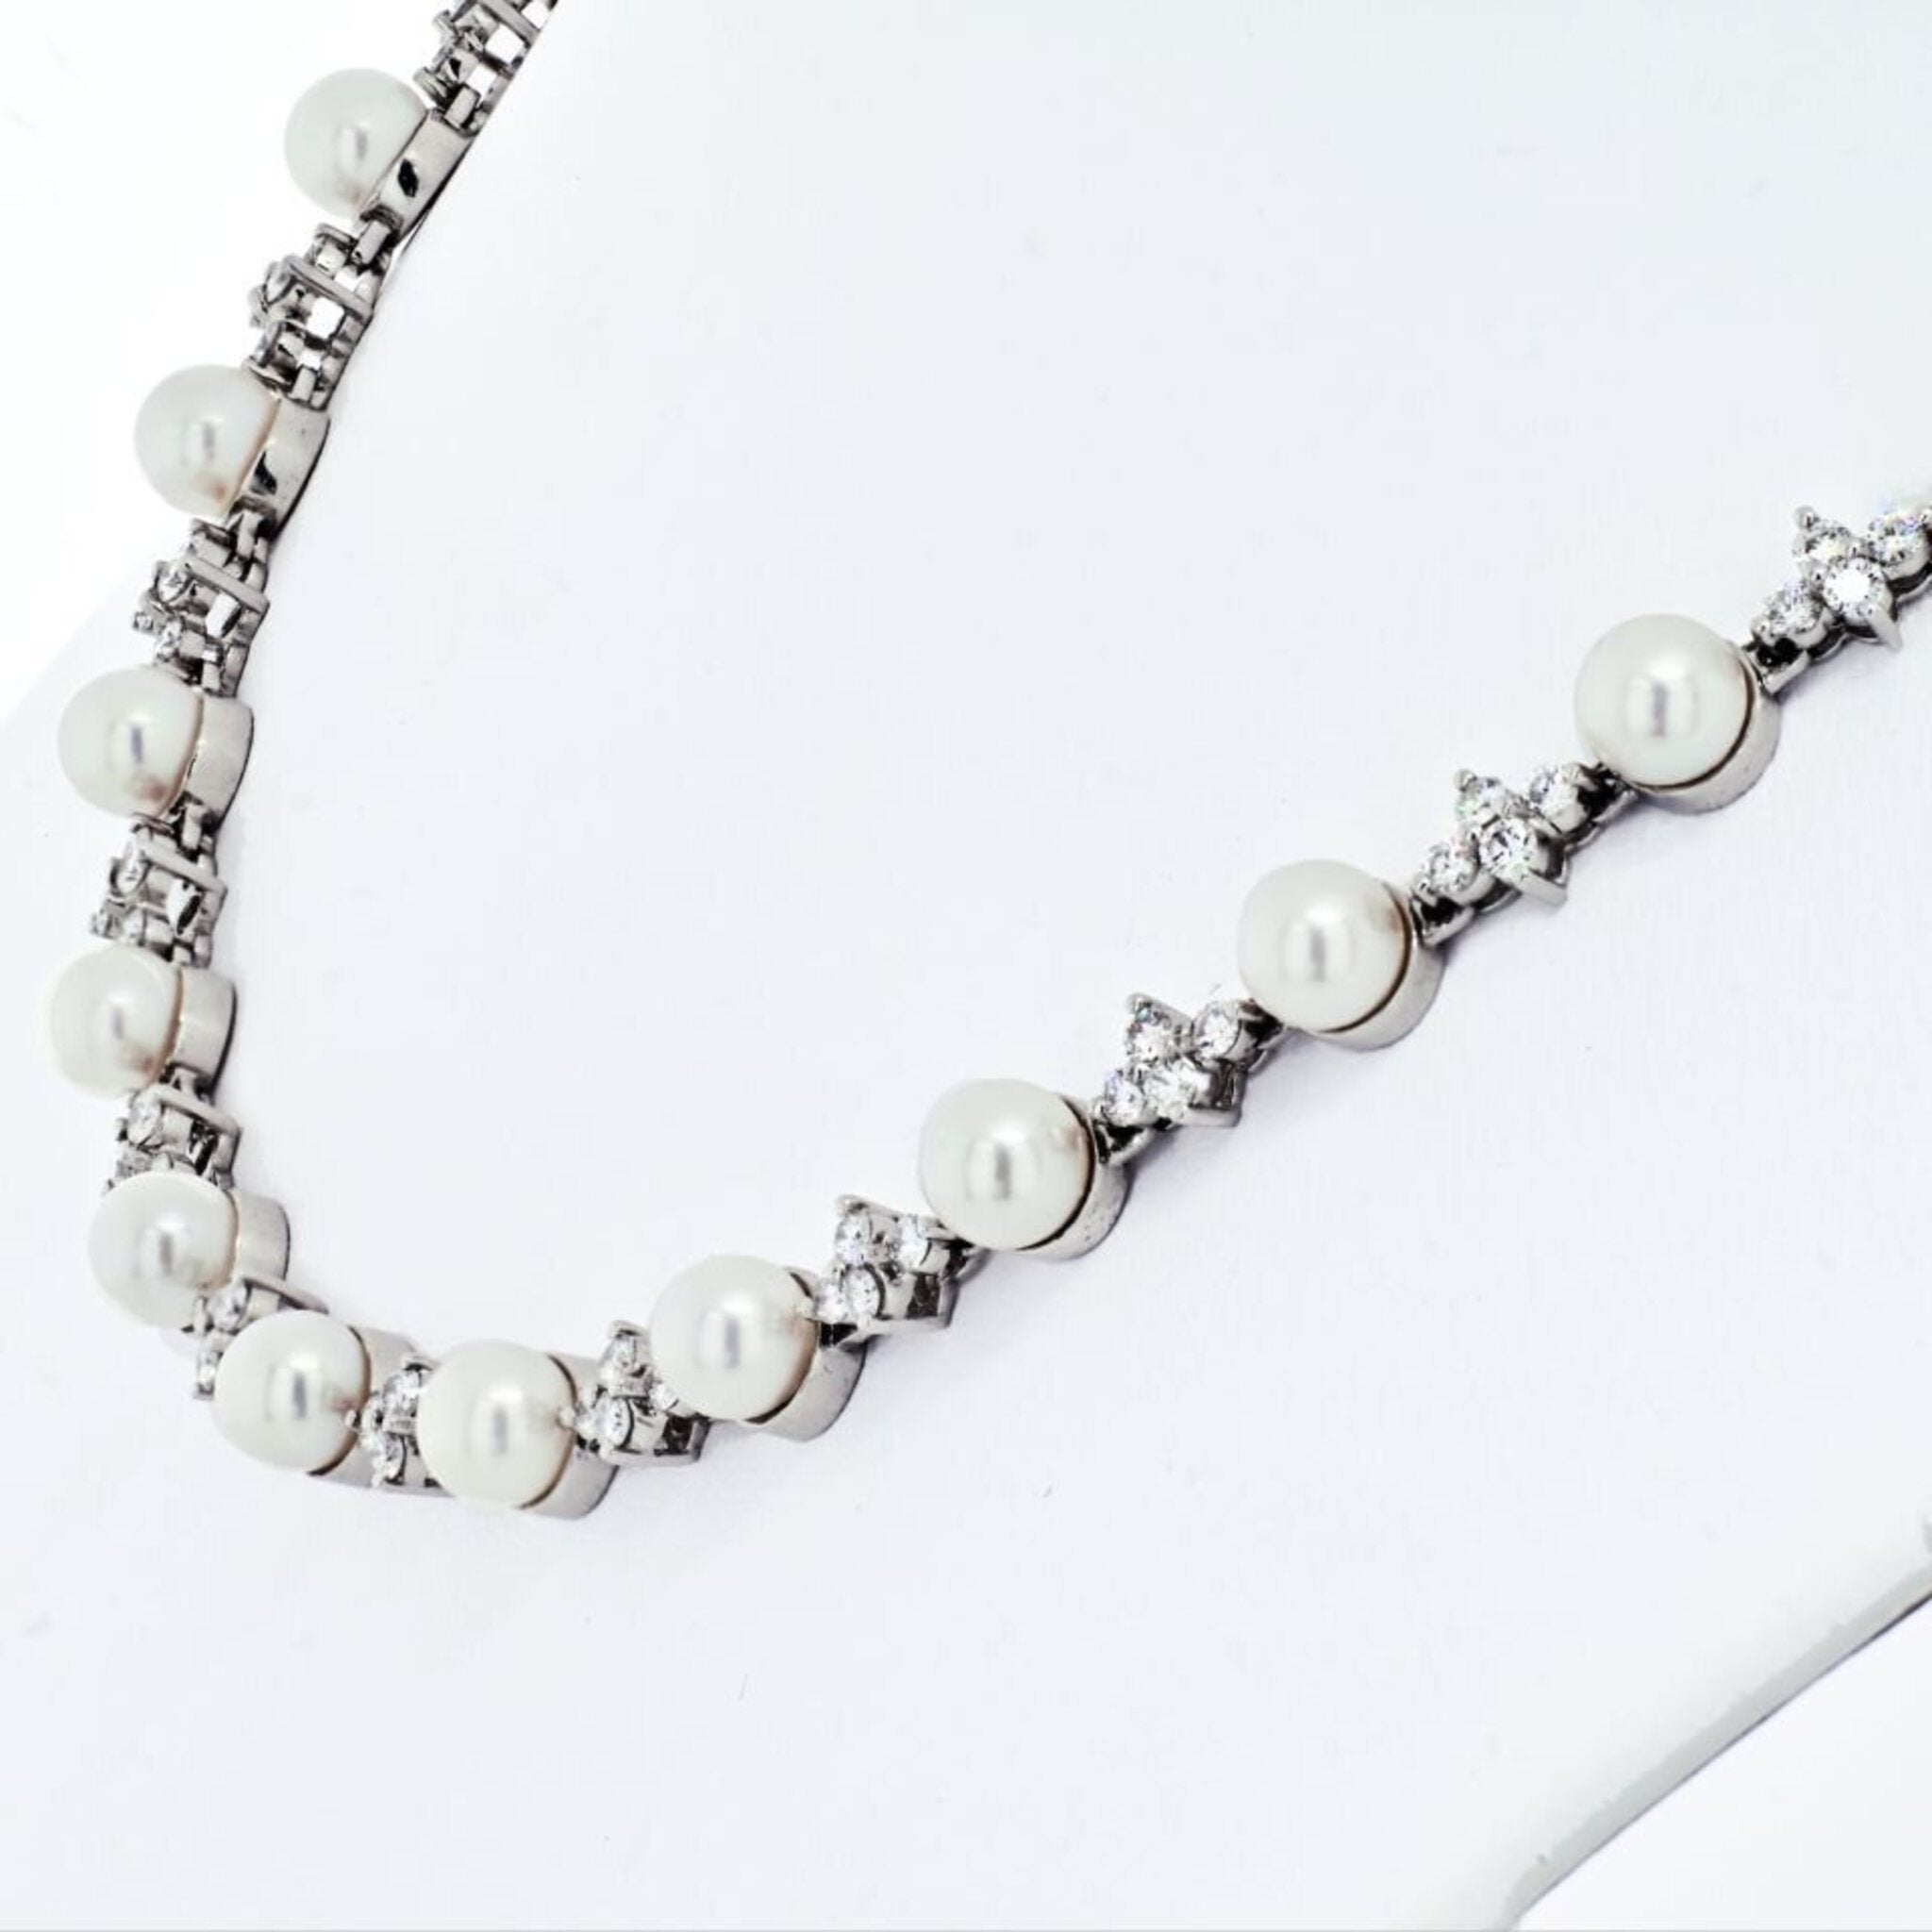 Tiffany & Co. Akoya Cultured Pearl 18K White Gold 7mm Signature X Necklace  | Samuelson's Diamonds